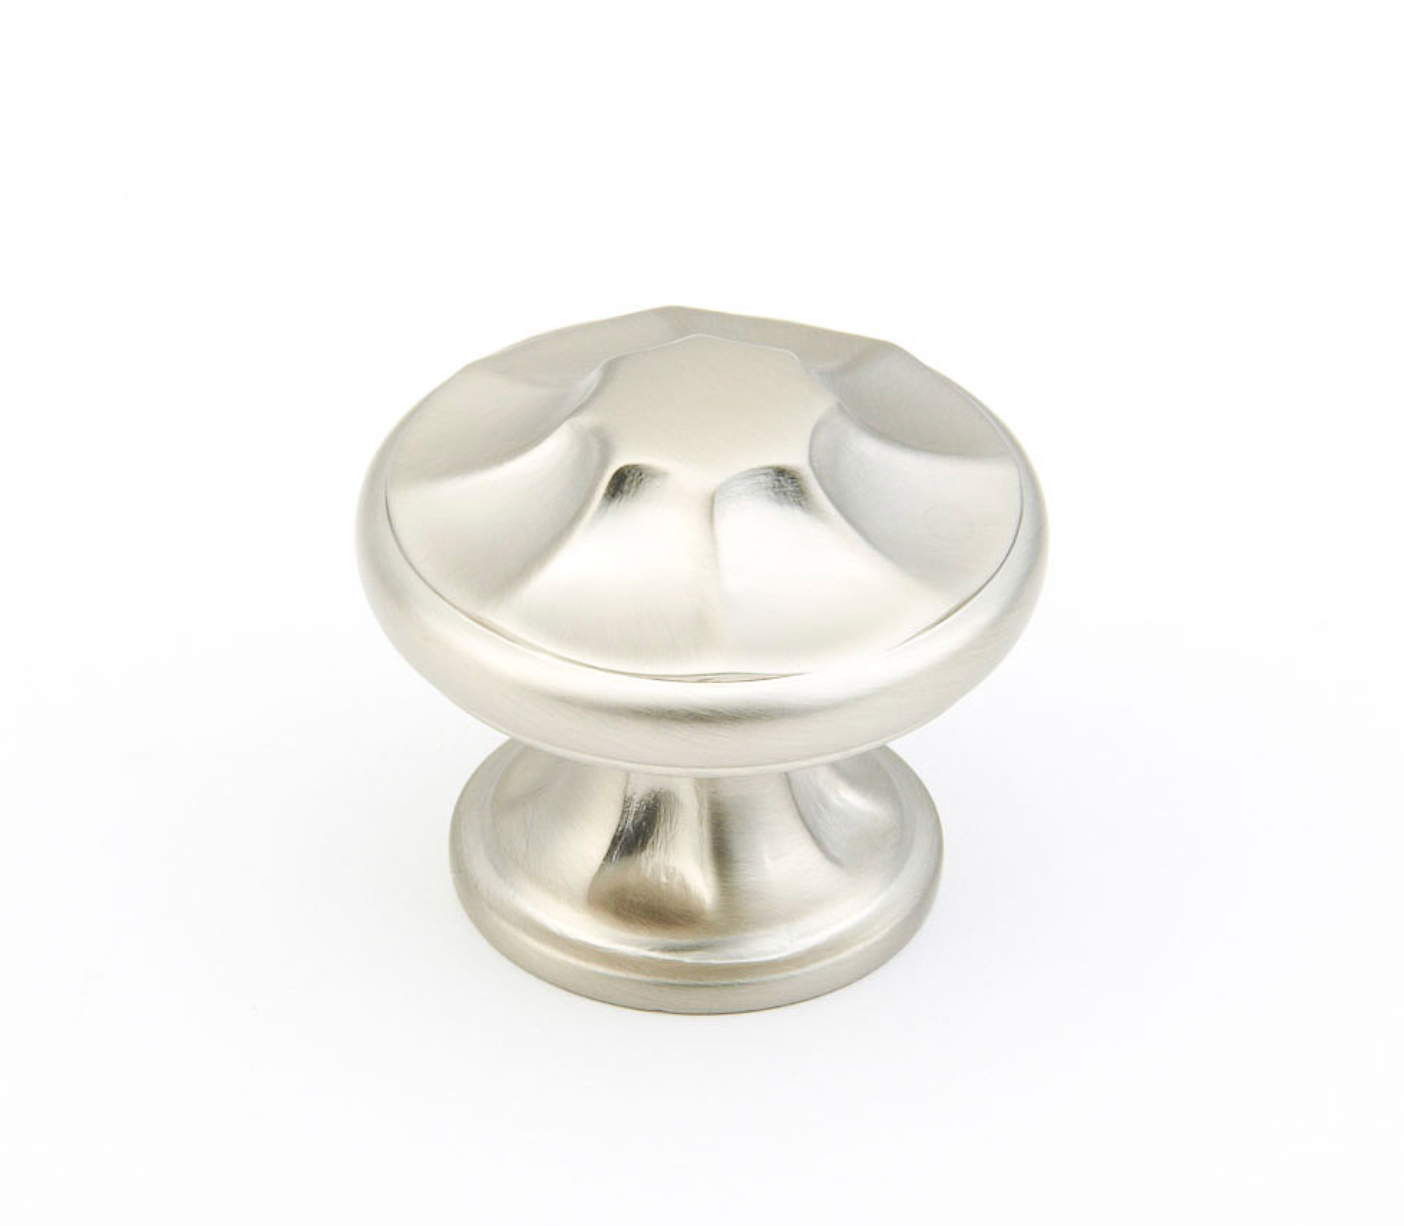 Satin Nickel "Regal" Cabinet Knobs and Drawer Pulls